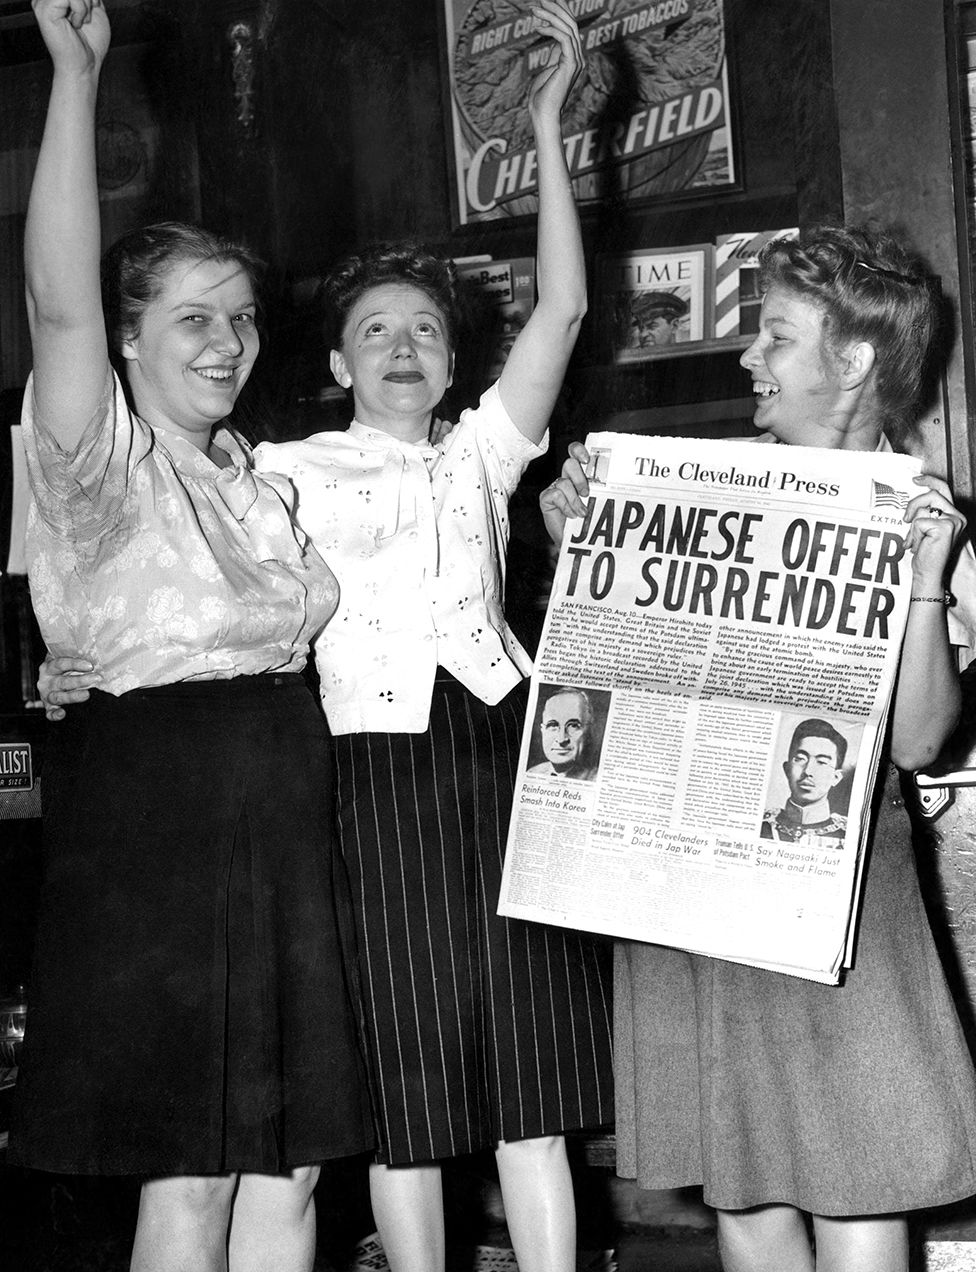 Women hold a newspaper and raise their arms